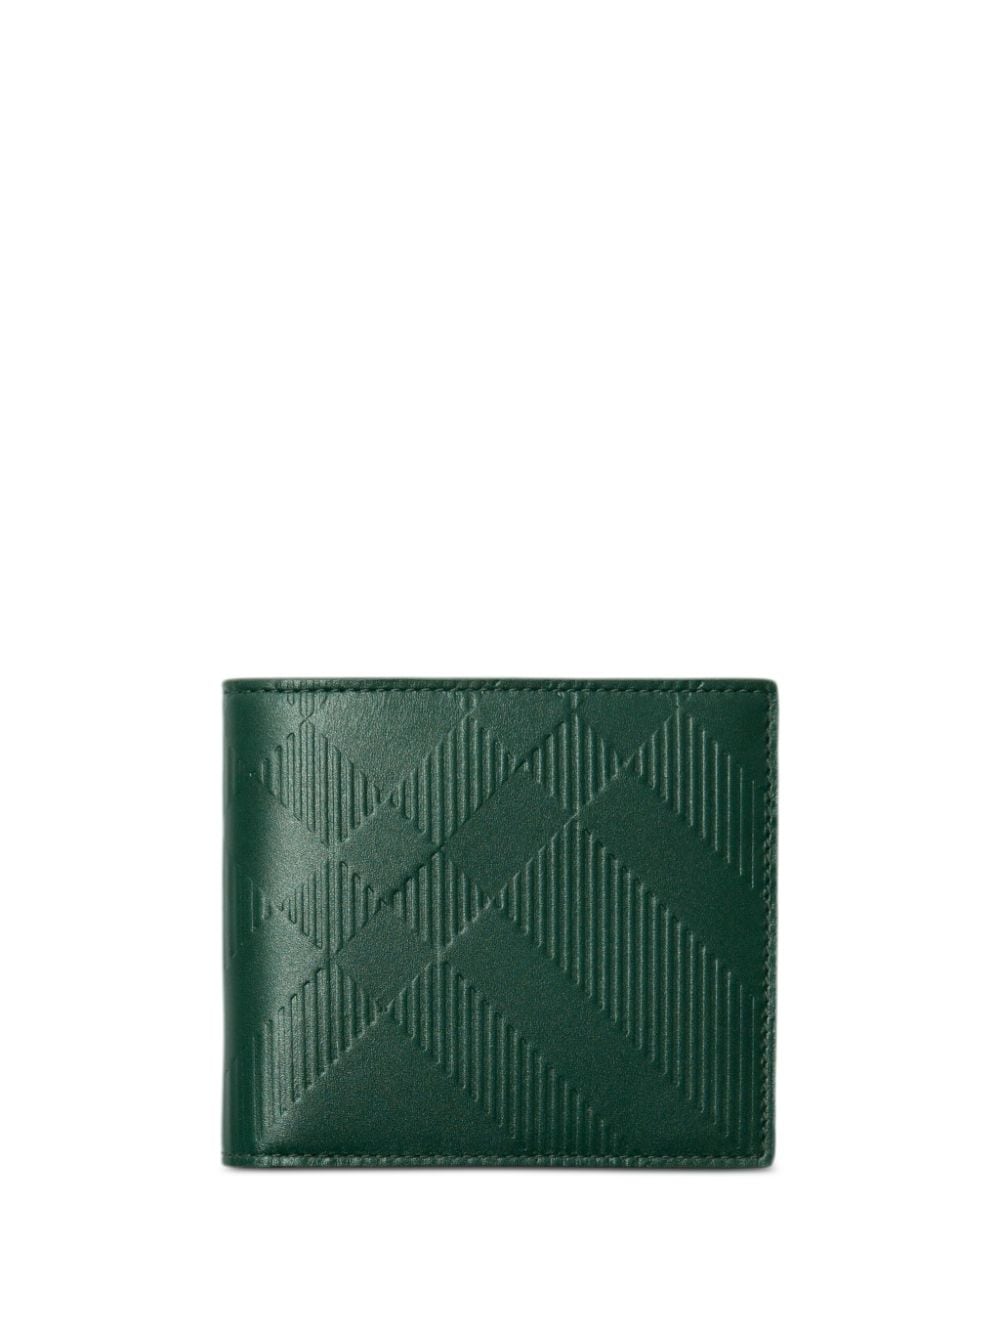 Burberry plaid-check leather wallet - Green von Burberry